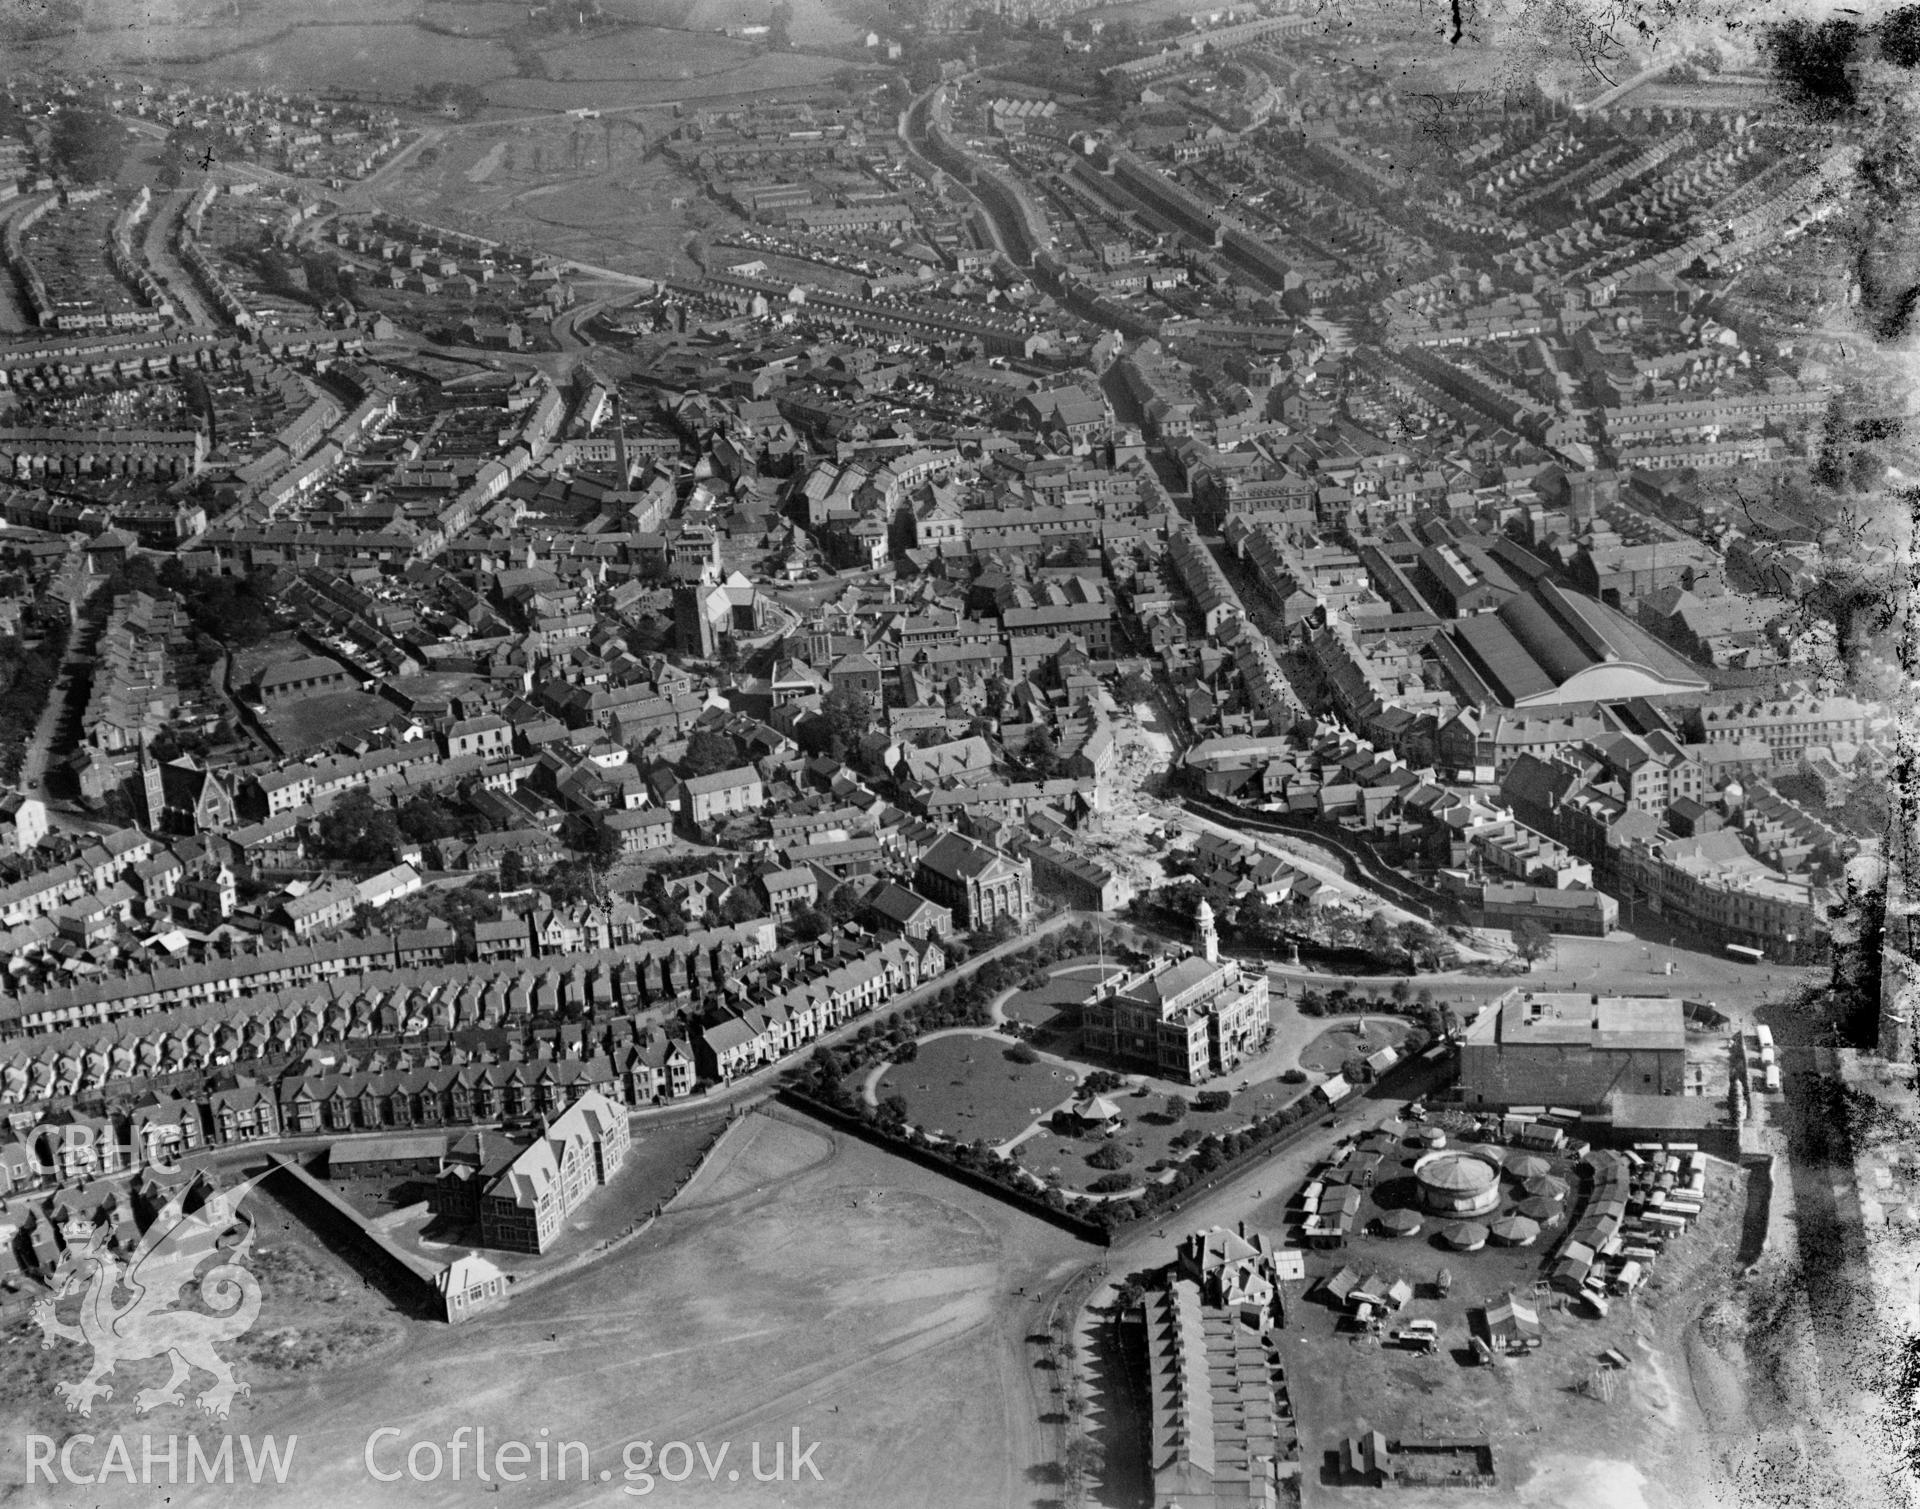 General view of Llanelli showing Town Hall and fair, oblique aerial view. 5?x4? black and white glass plate negative.